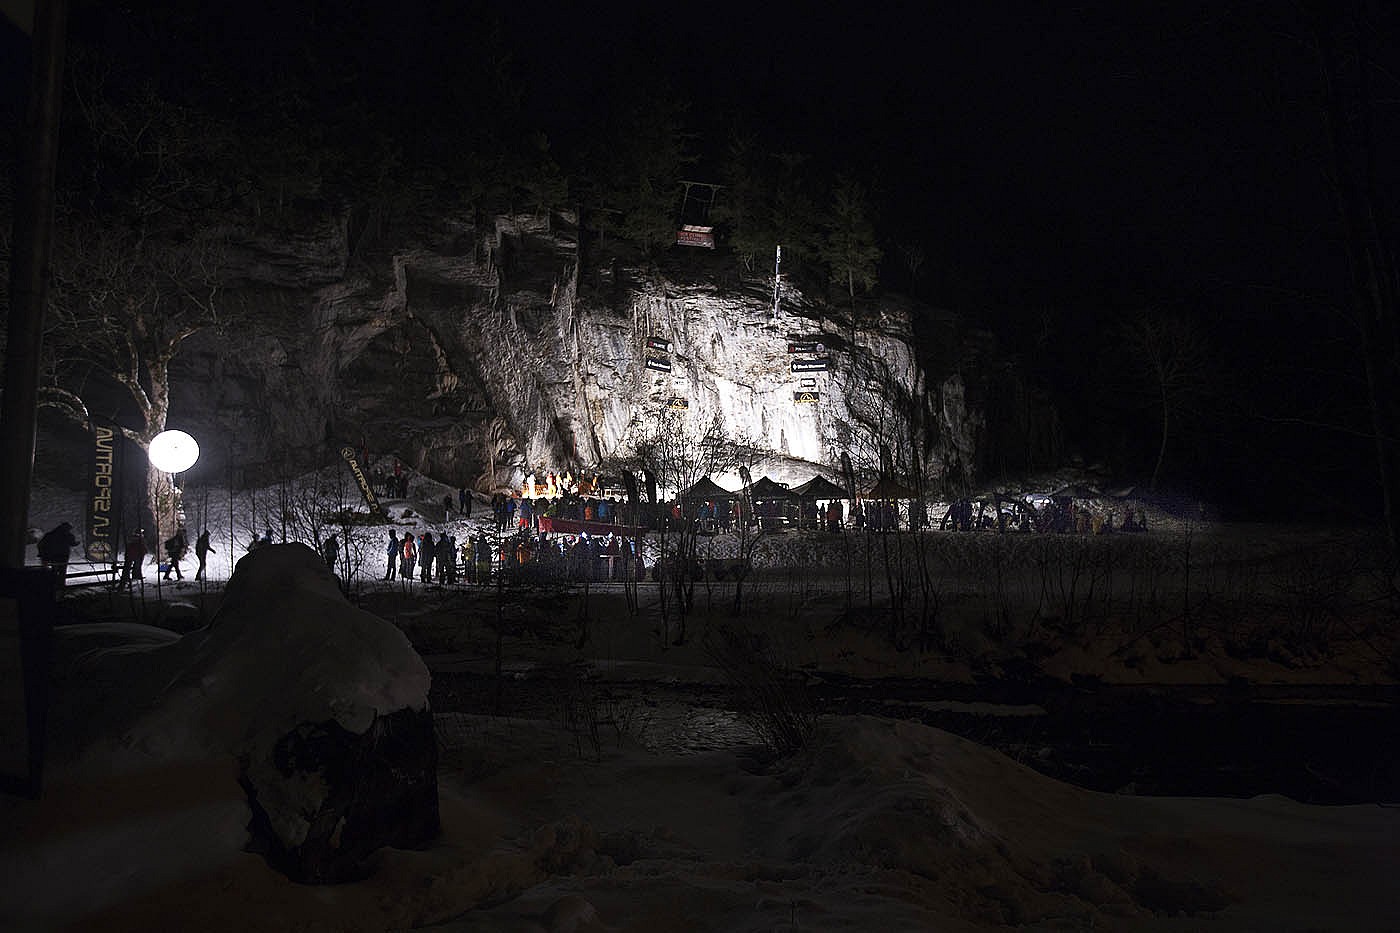 The floodlit event in the evening drew a large crowd  © Andrea Badrutt